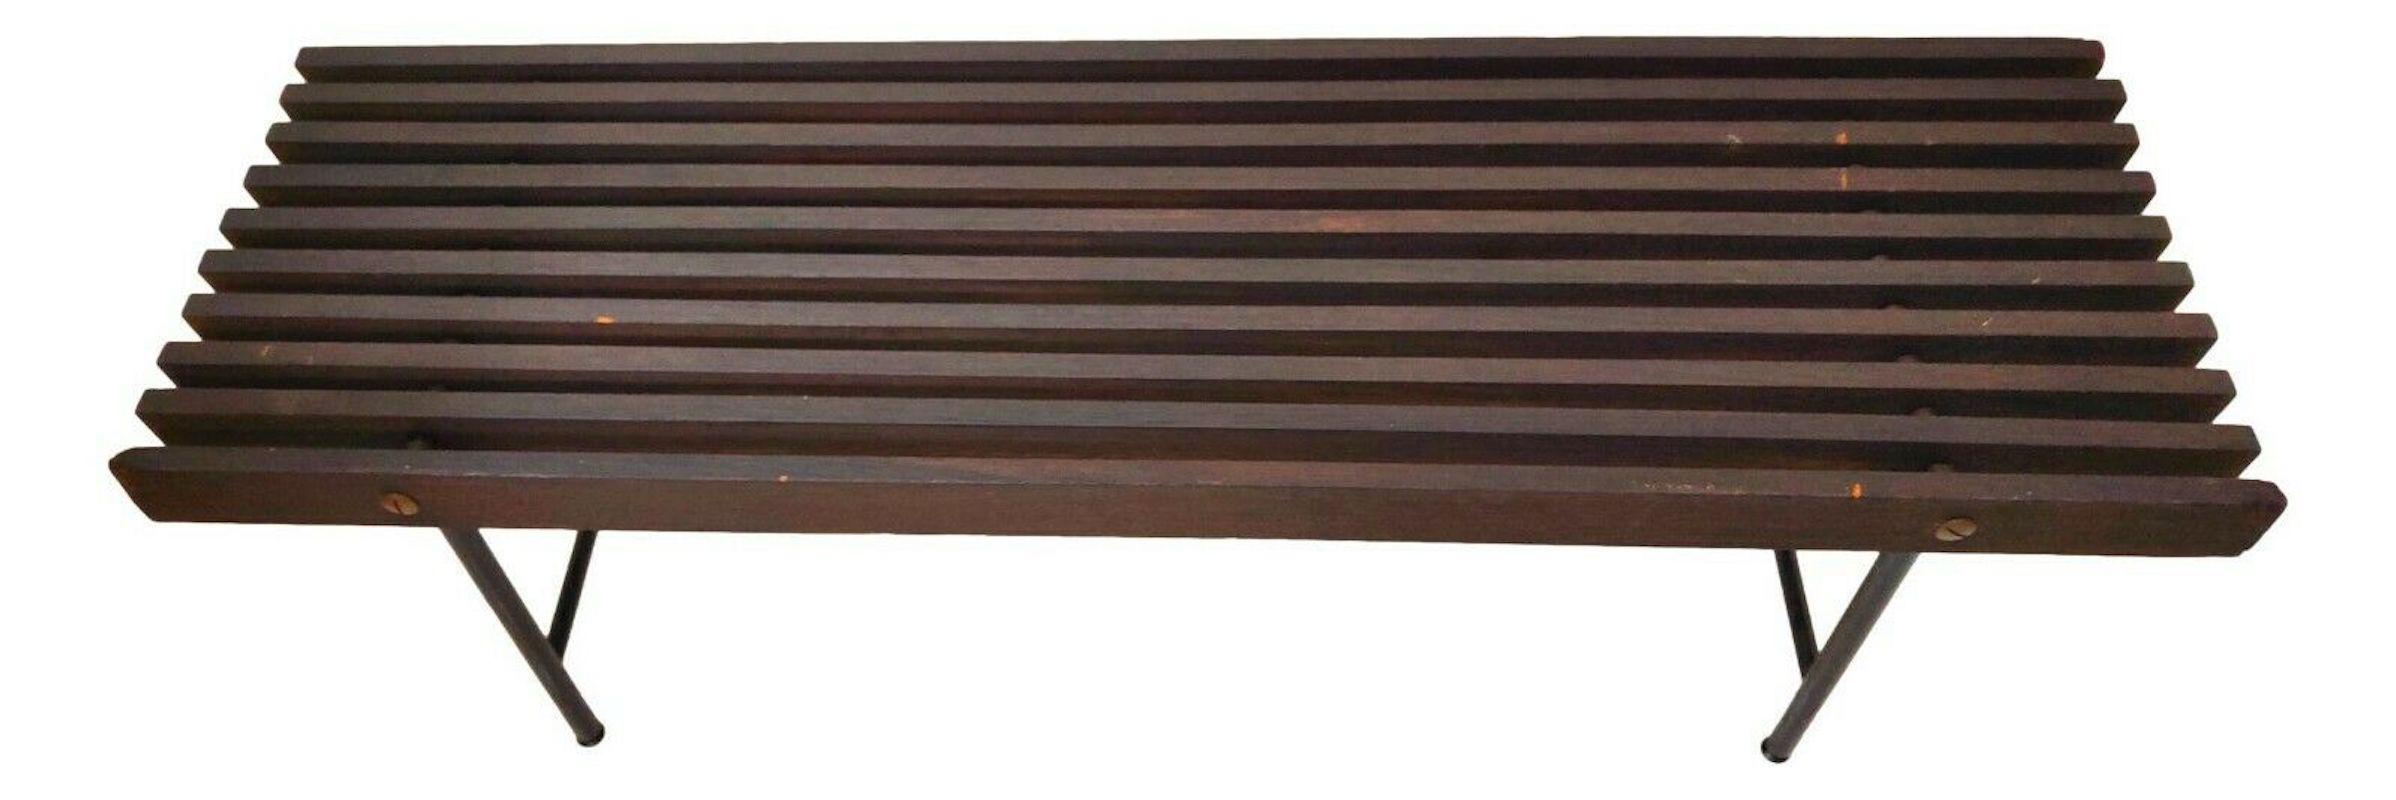 Mid-20th Century Wooden Bench Designed by Ico and Luisa Parisi, 1960s